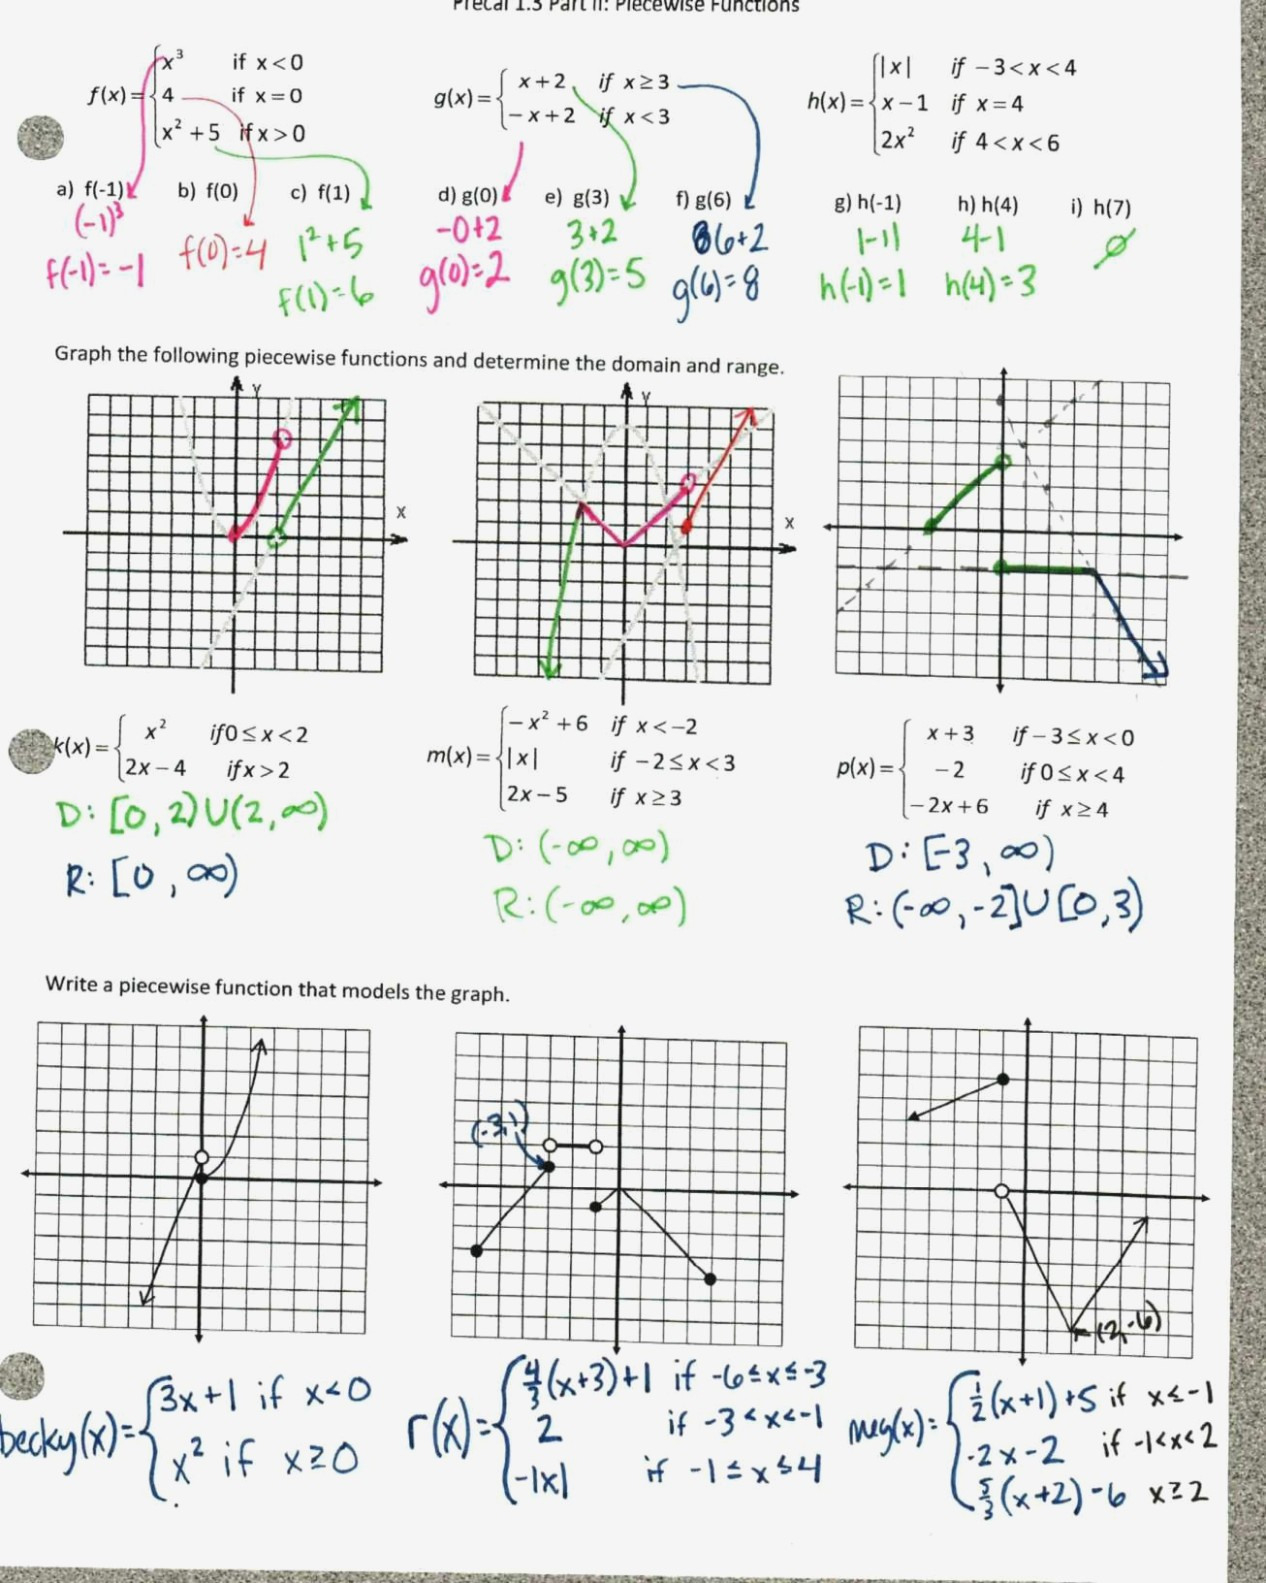 Graphing Quadratic Functions Worksheet Answers